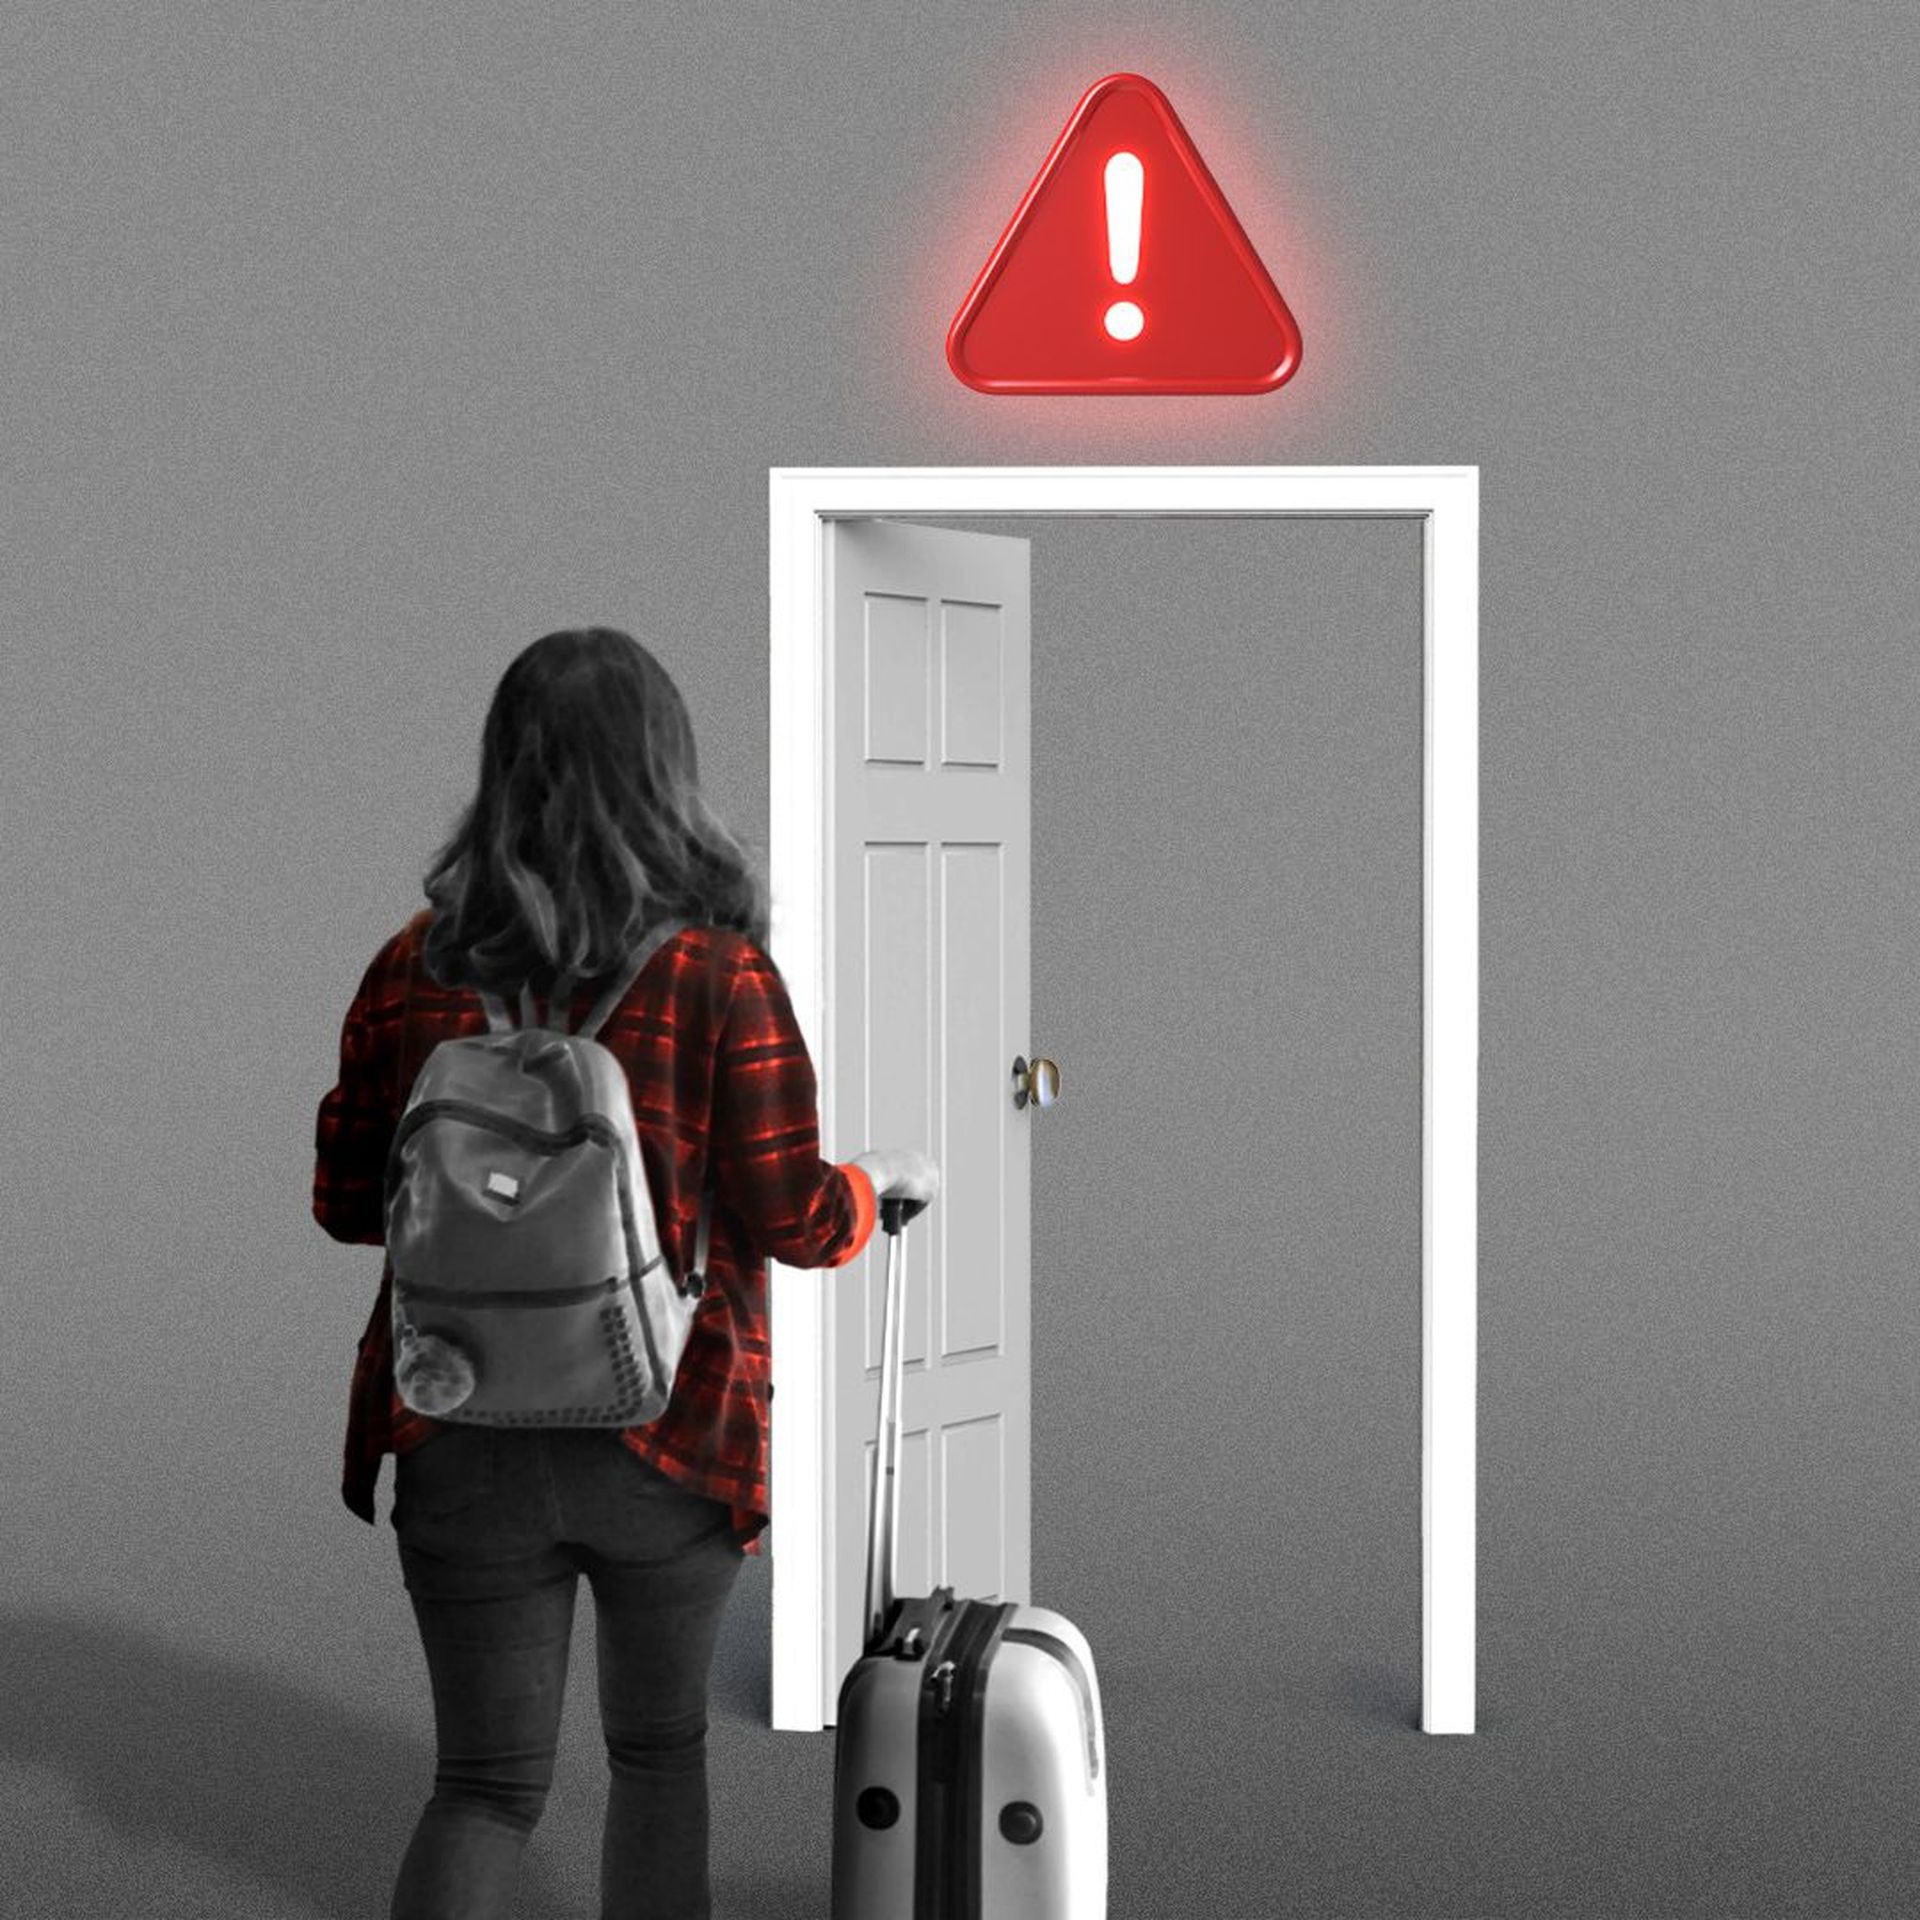 Illustration of a person with a suitcase walking towards a door with a large warning sign above it.